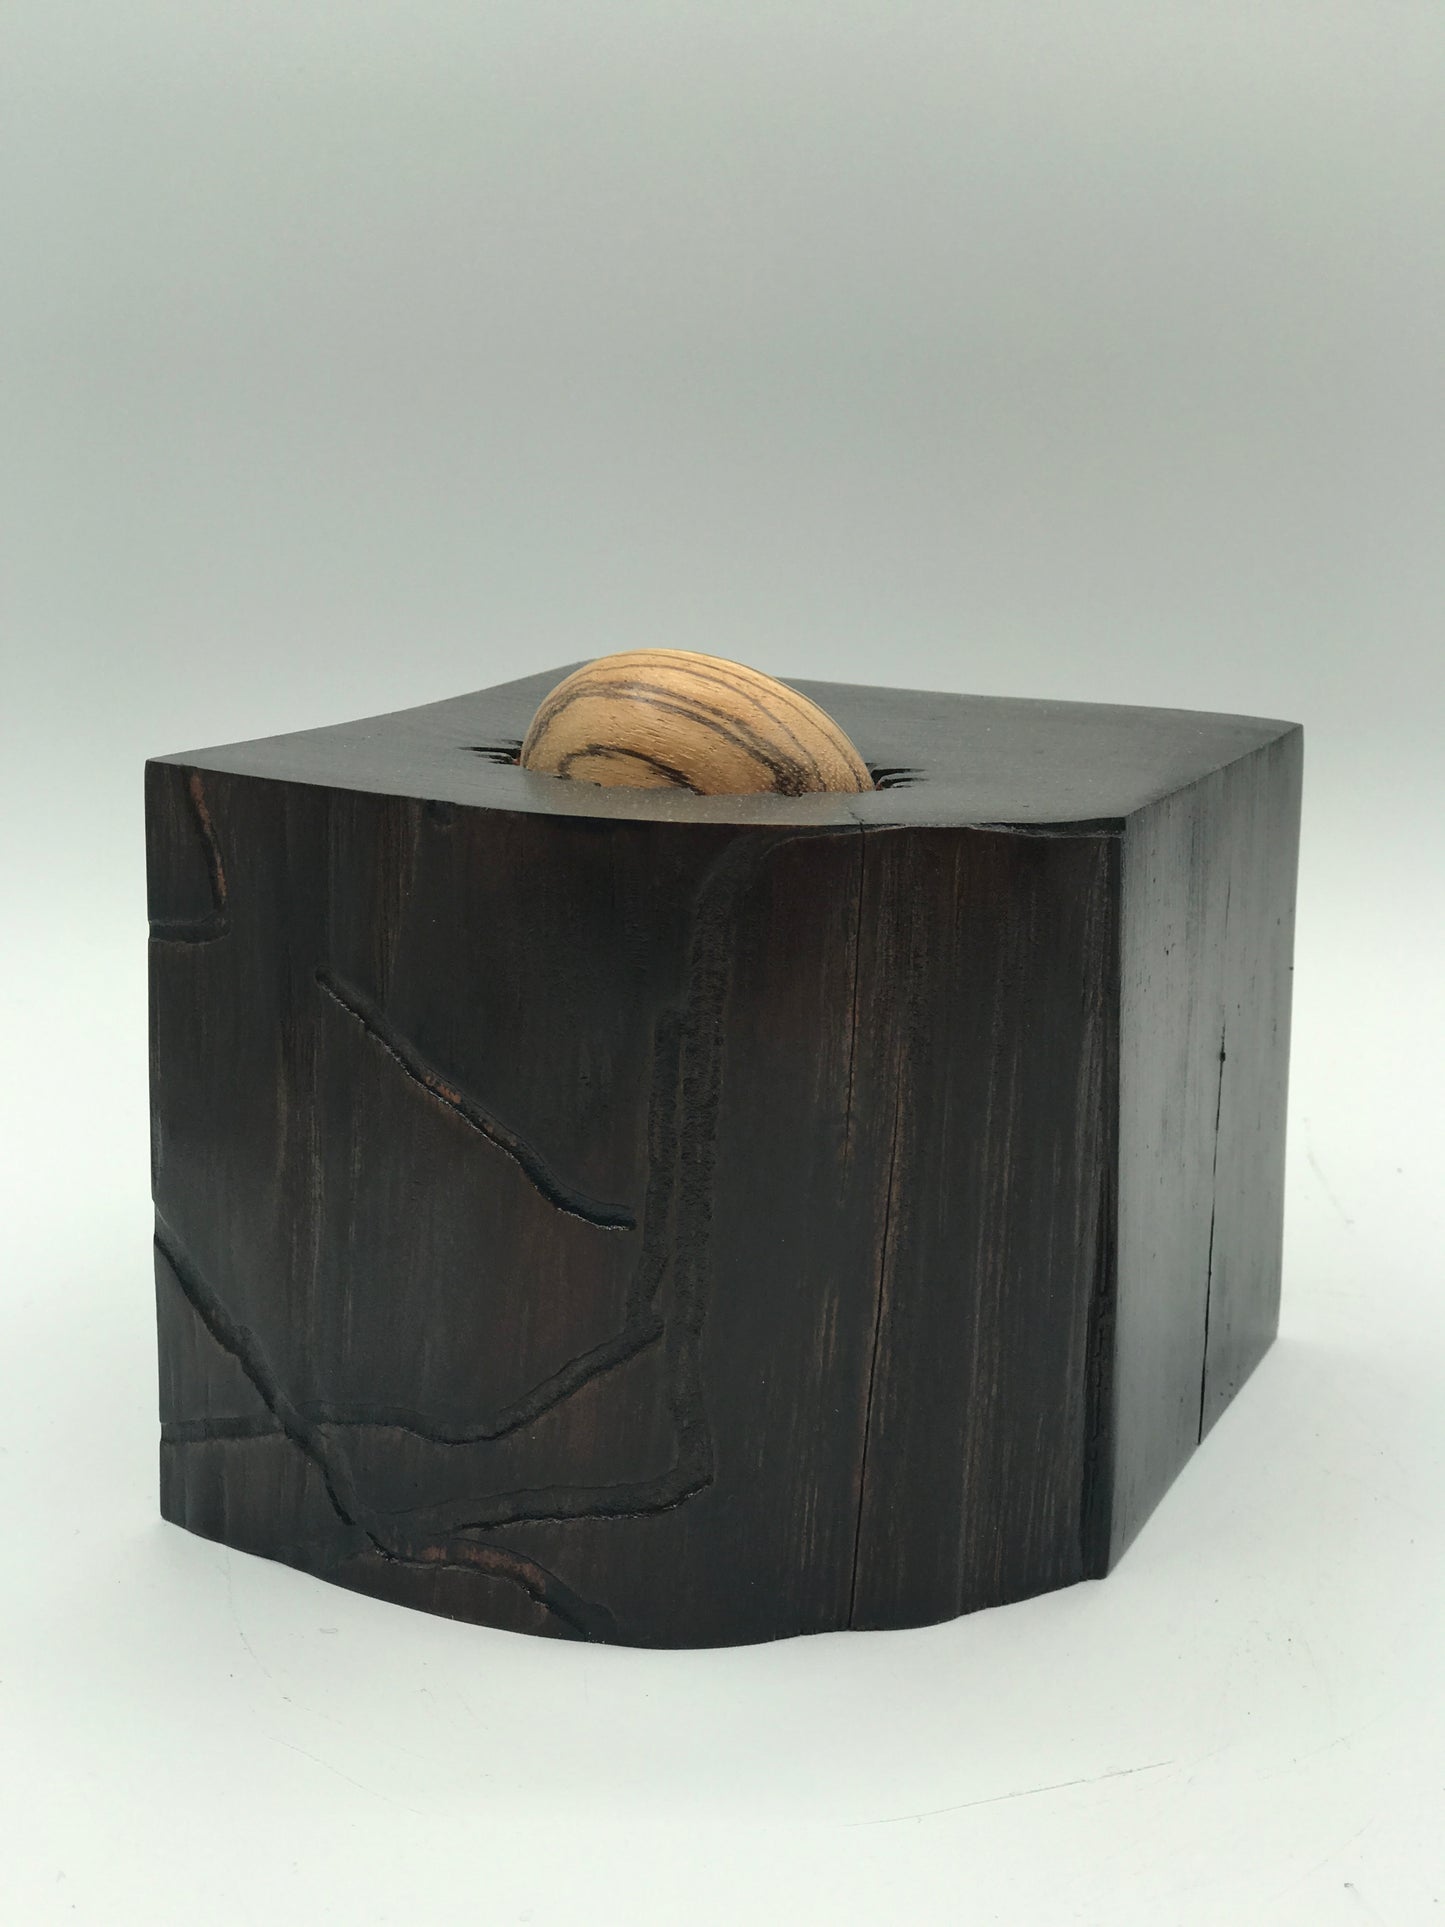 Wooden Nest -  Live Edge Nest with Tigerwood Egg